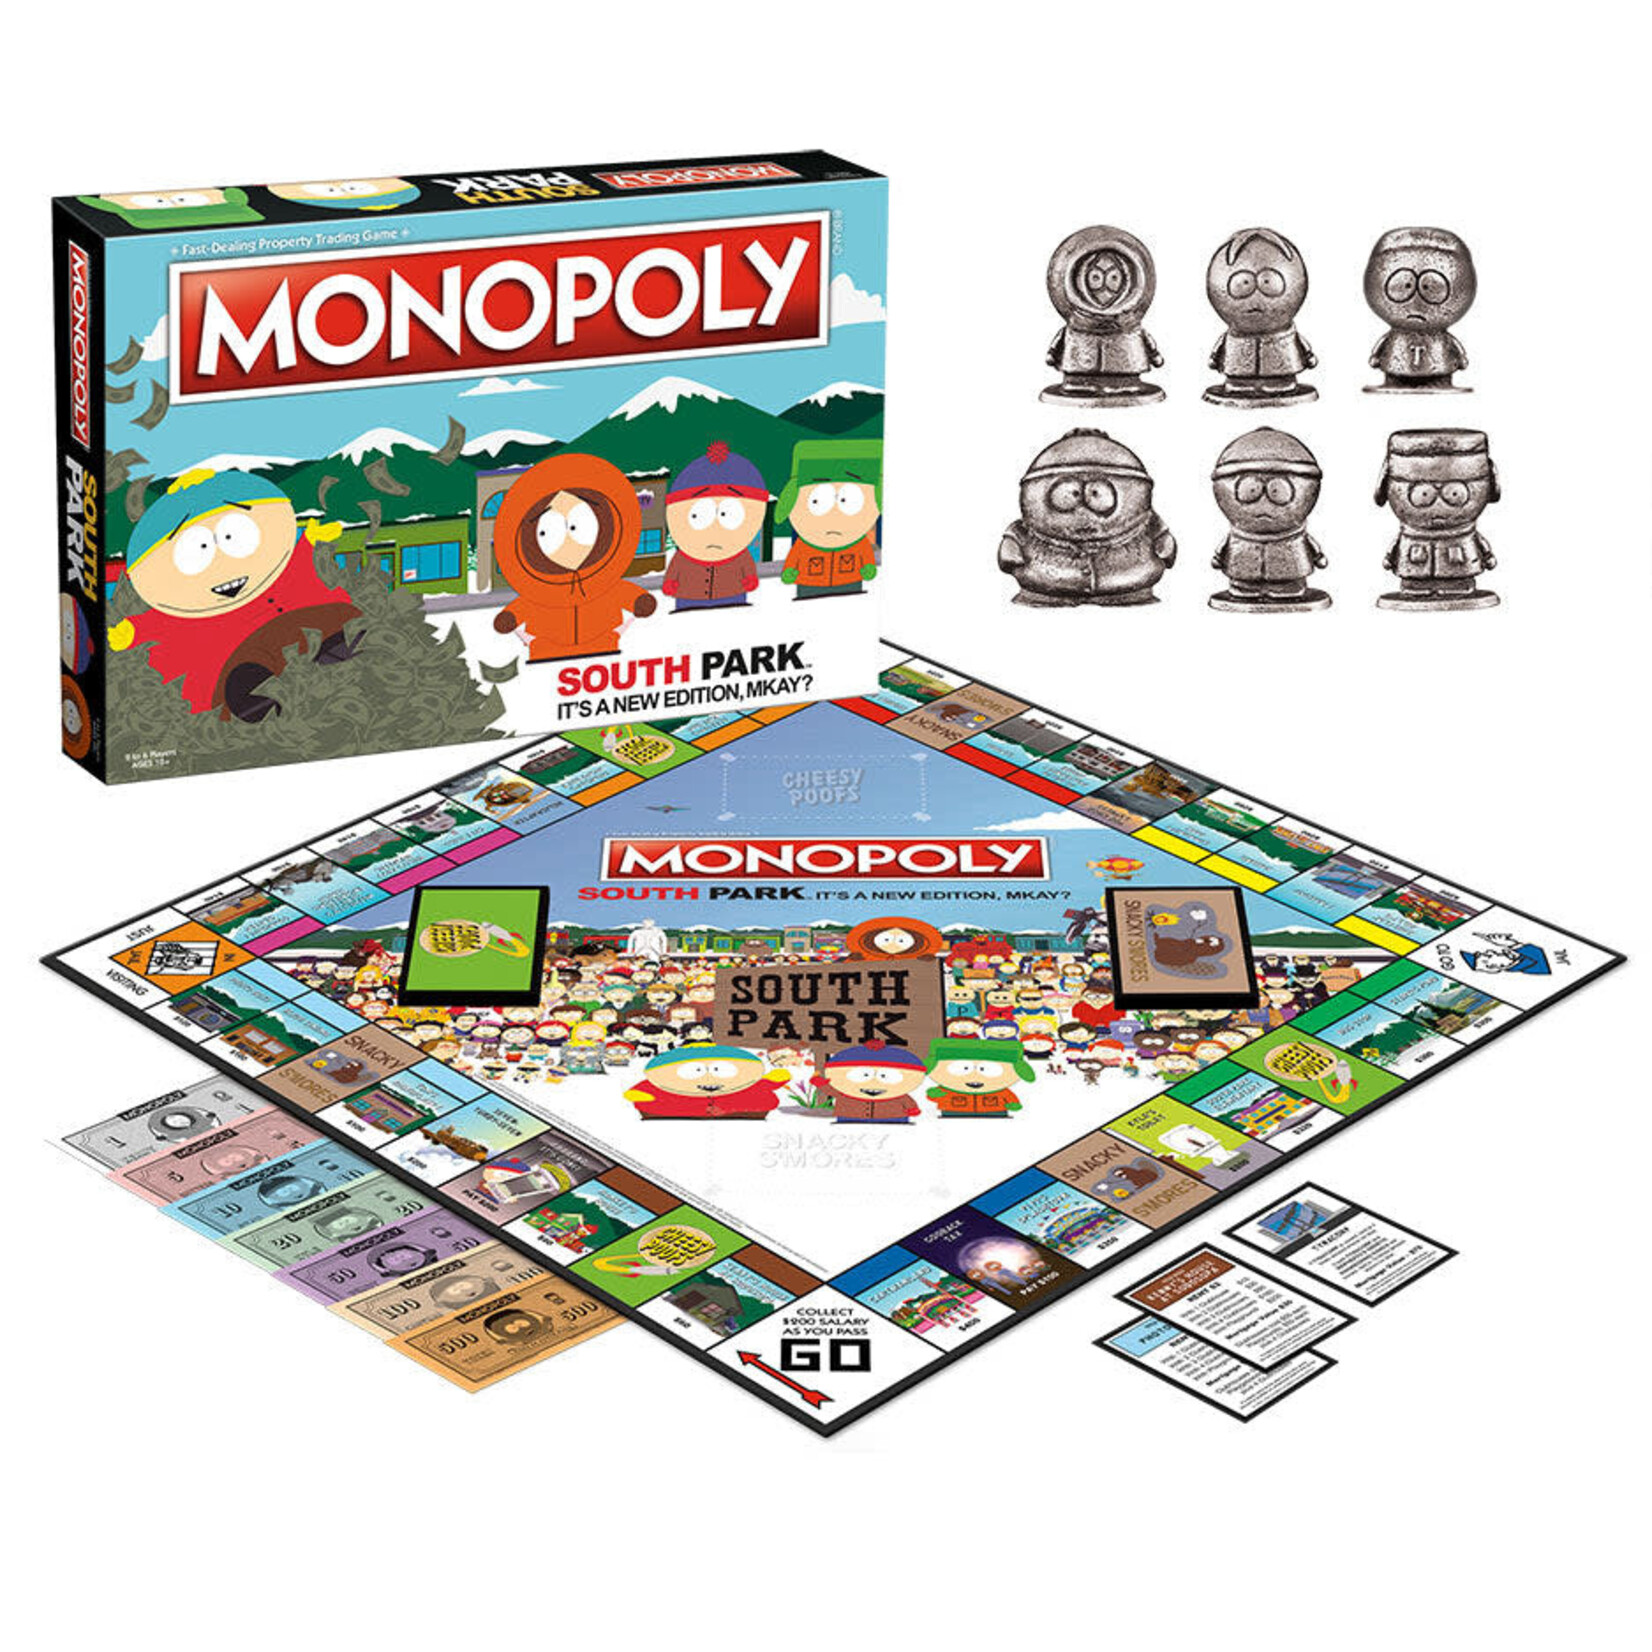 The OP Games Monopoly South Park